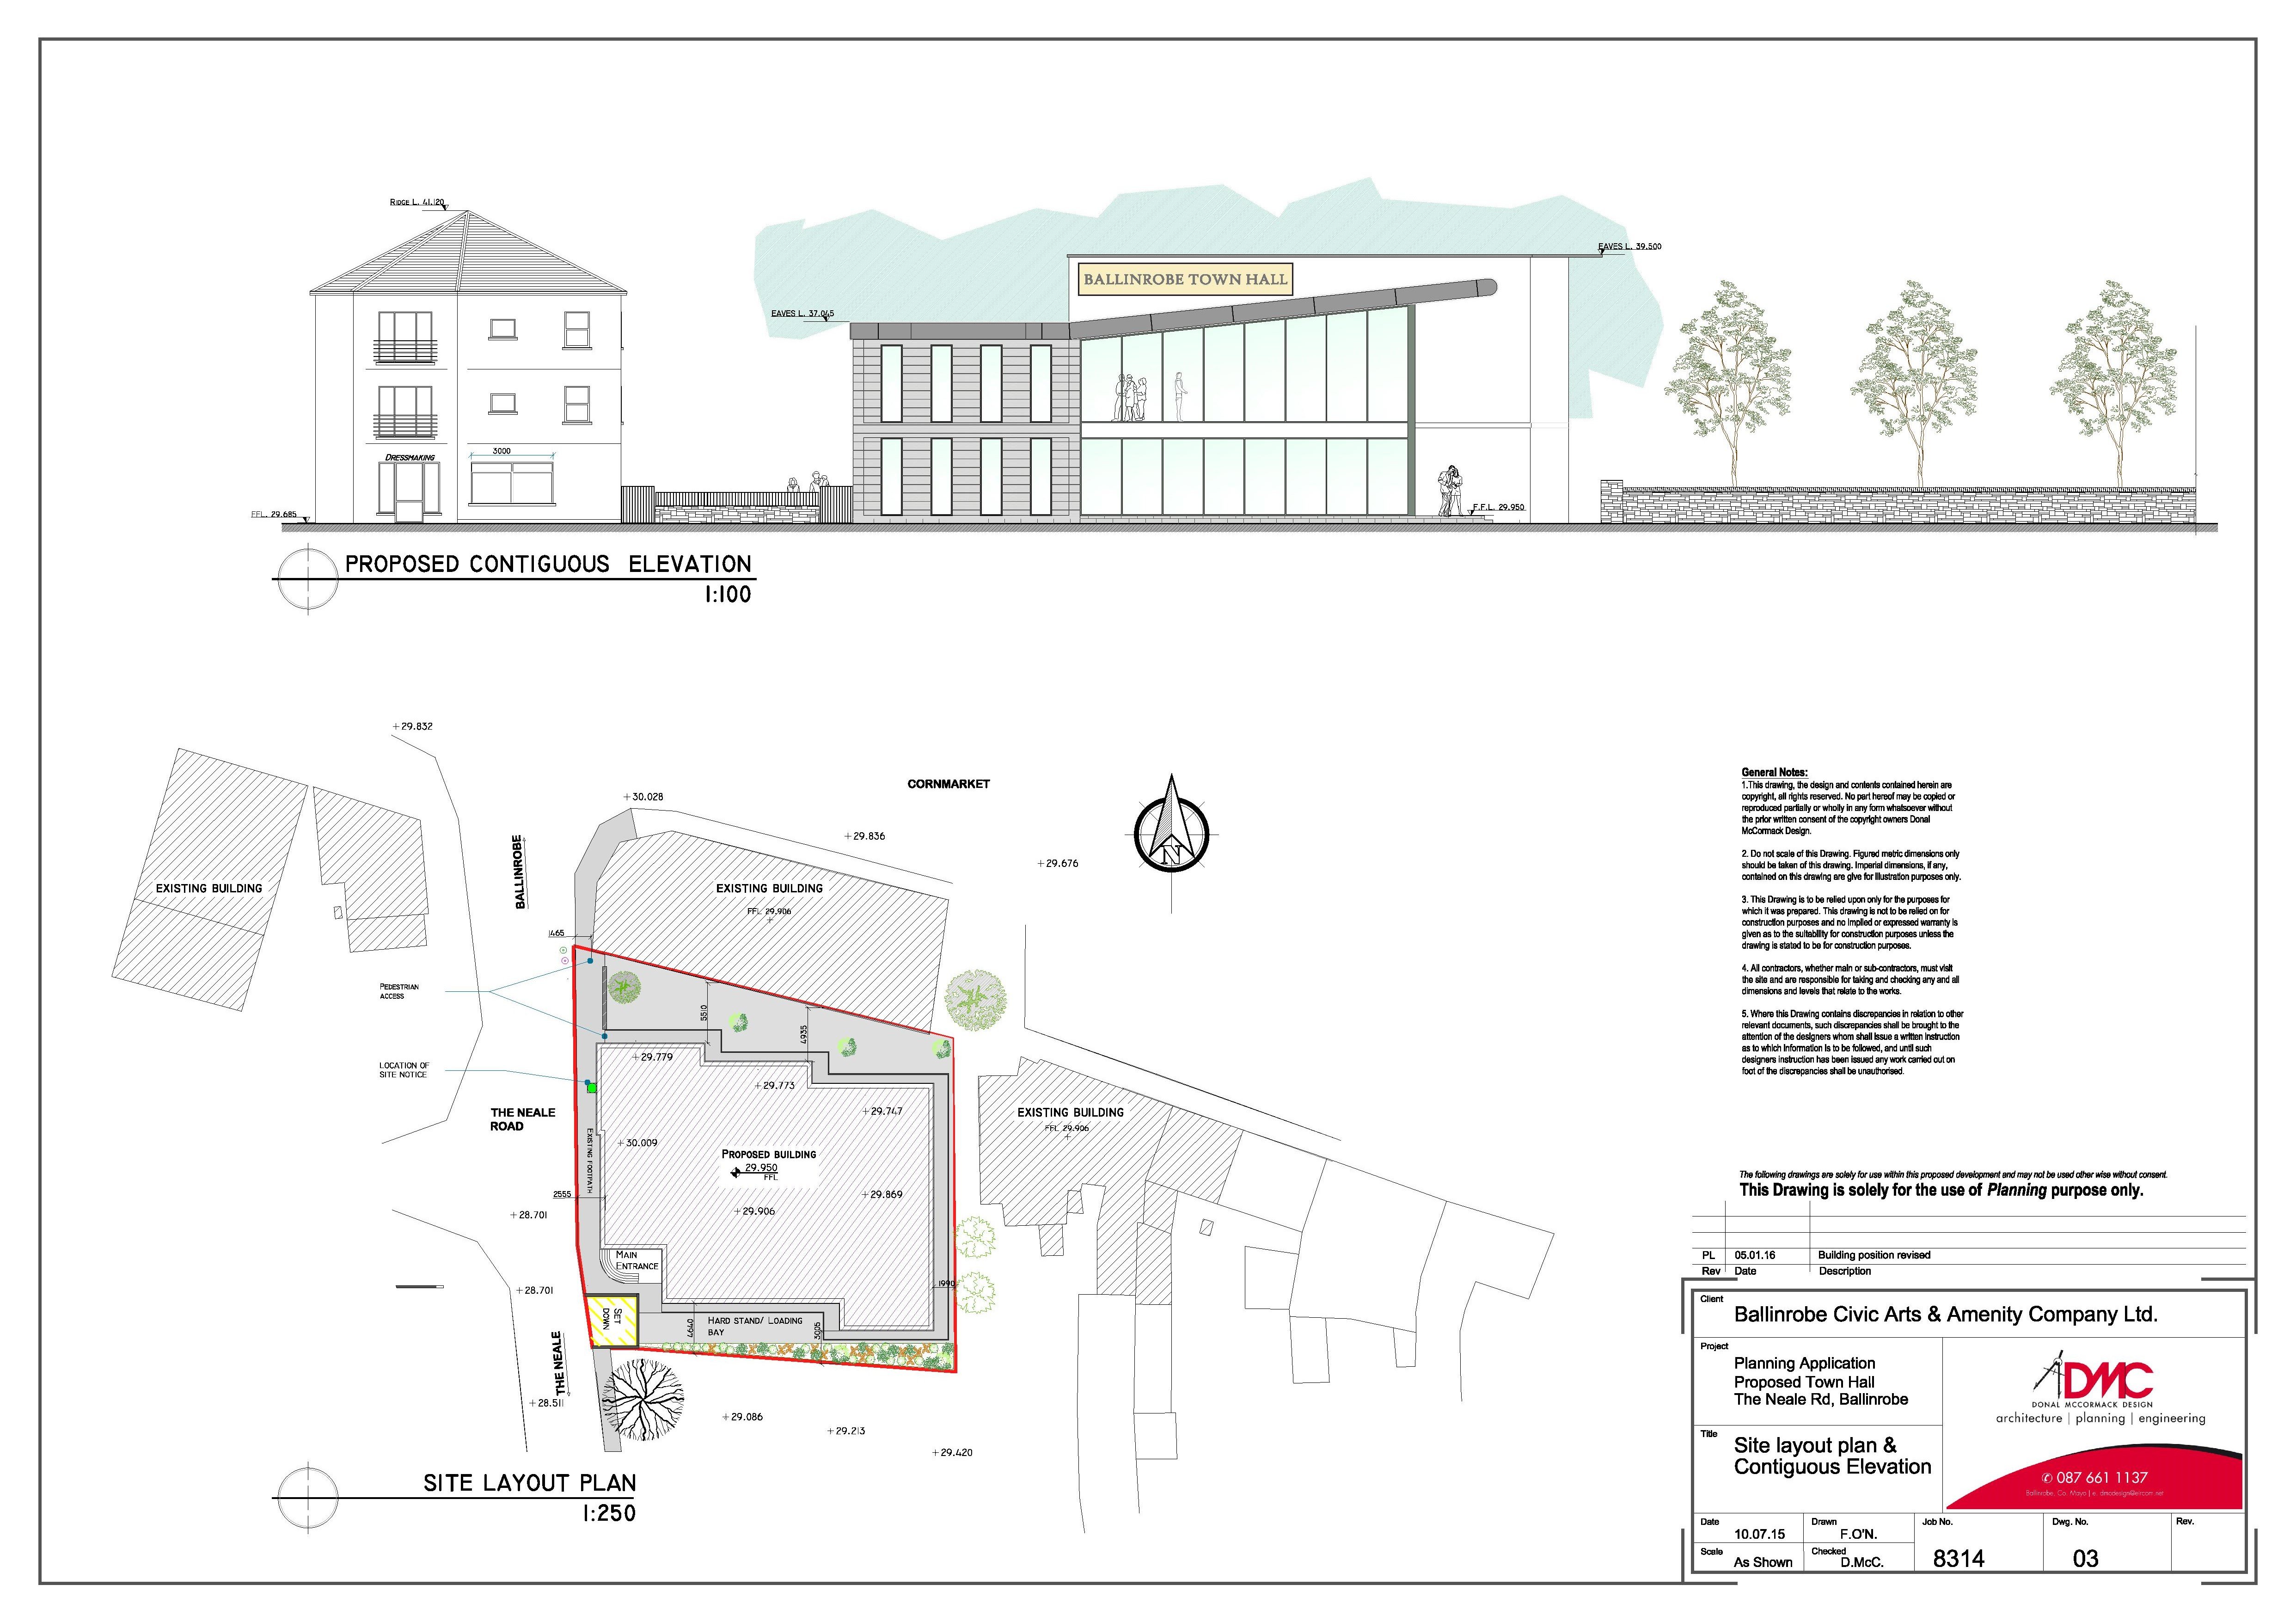 Proposed site layout plan of new Ballinrobe Town Hall